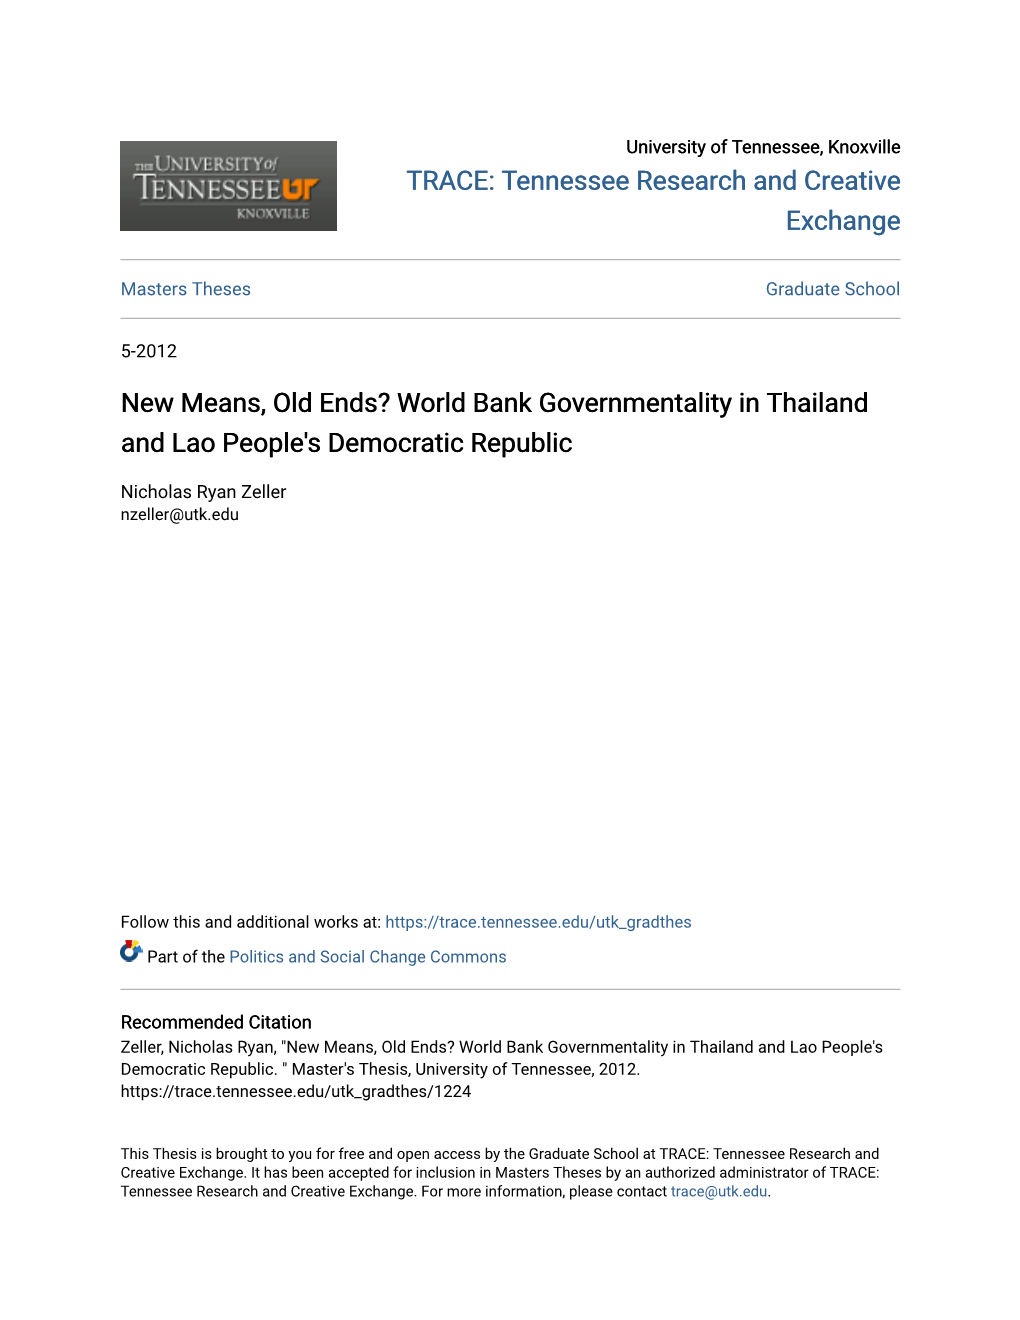 New Means, Old Ends? World Bank Governmentality in Thailand and Lao People's Democratic Republic